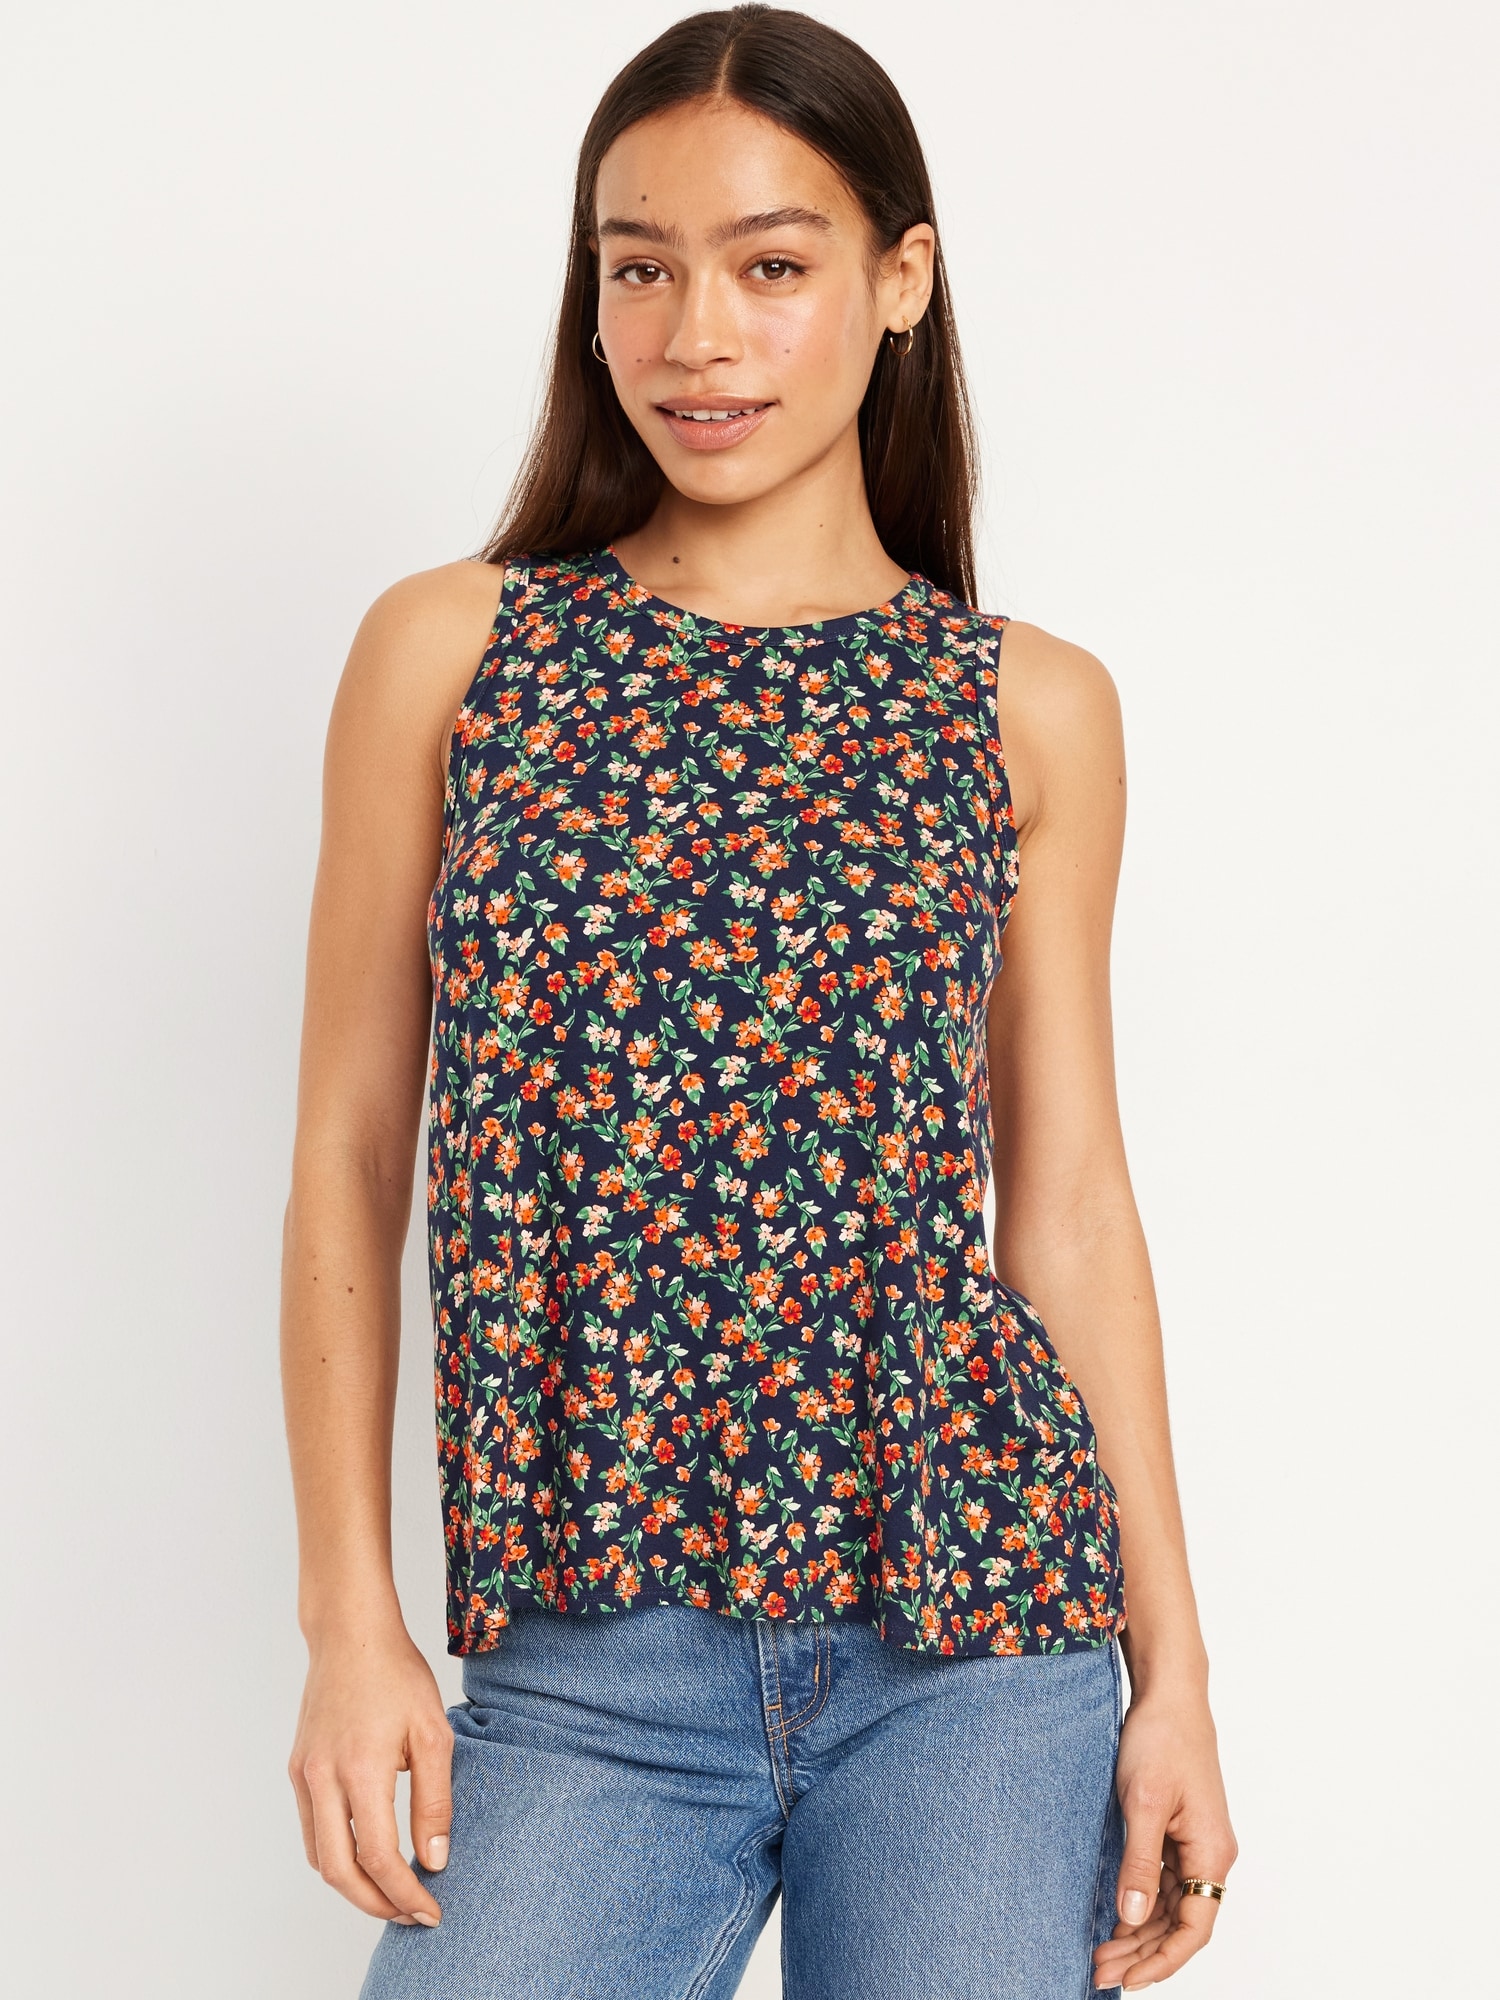 Women's Clothing | Old Navy